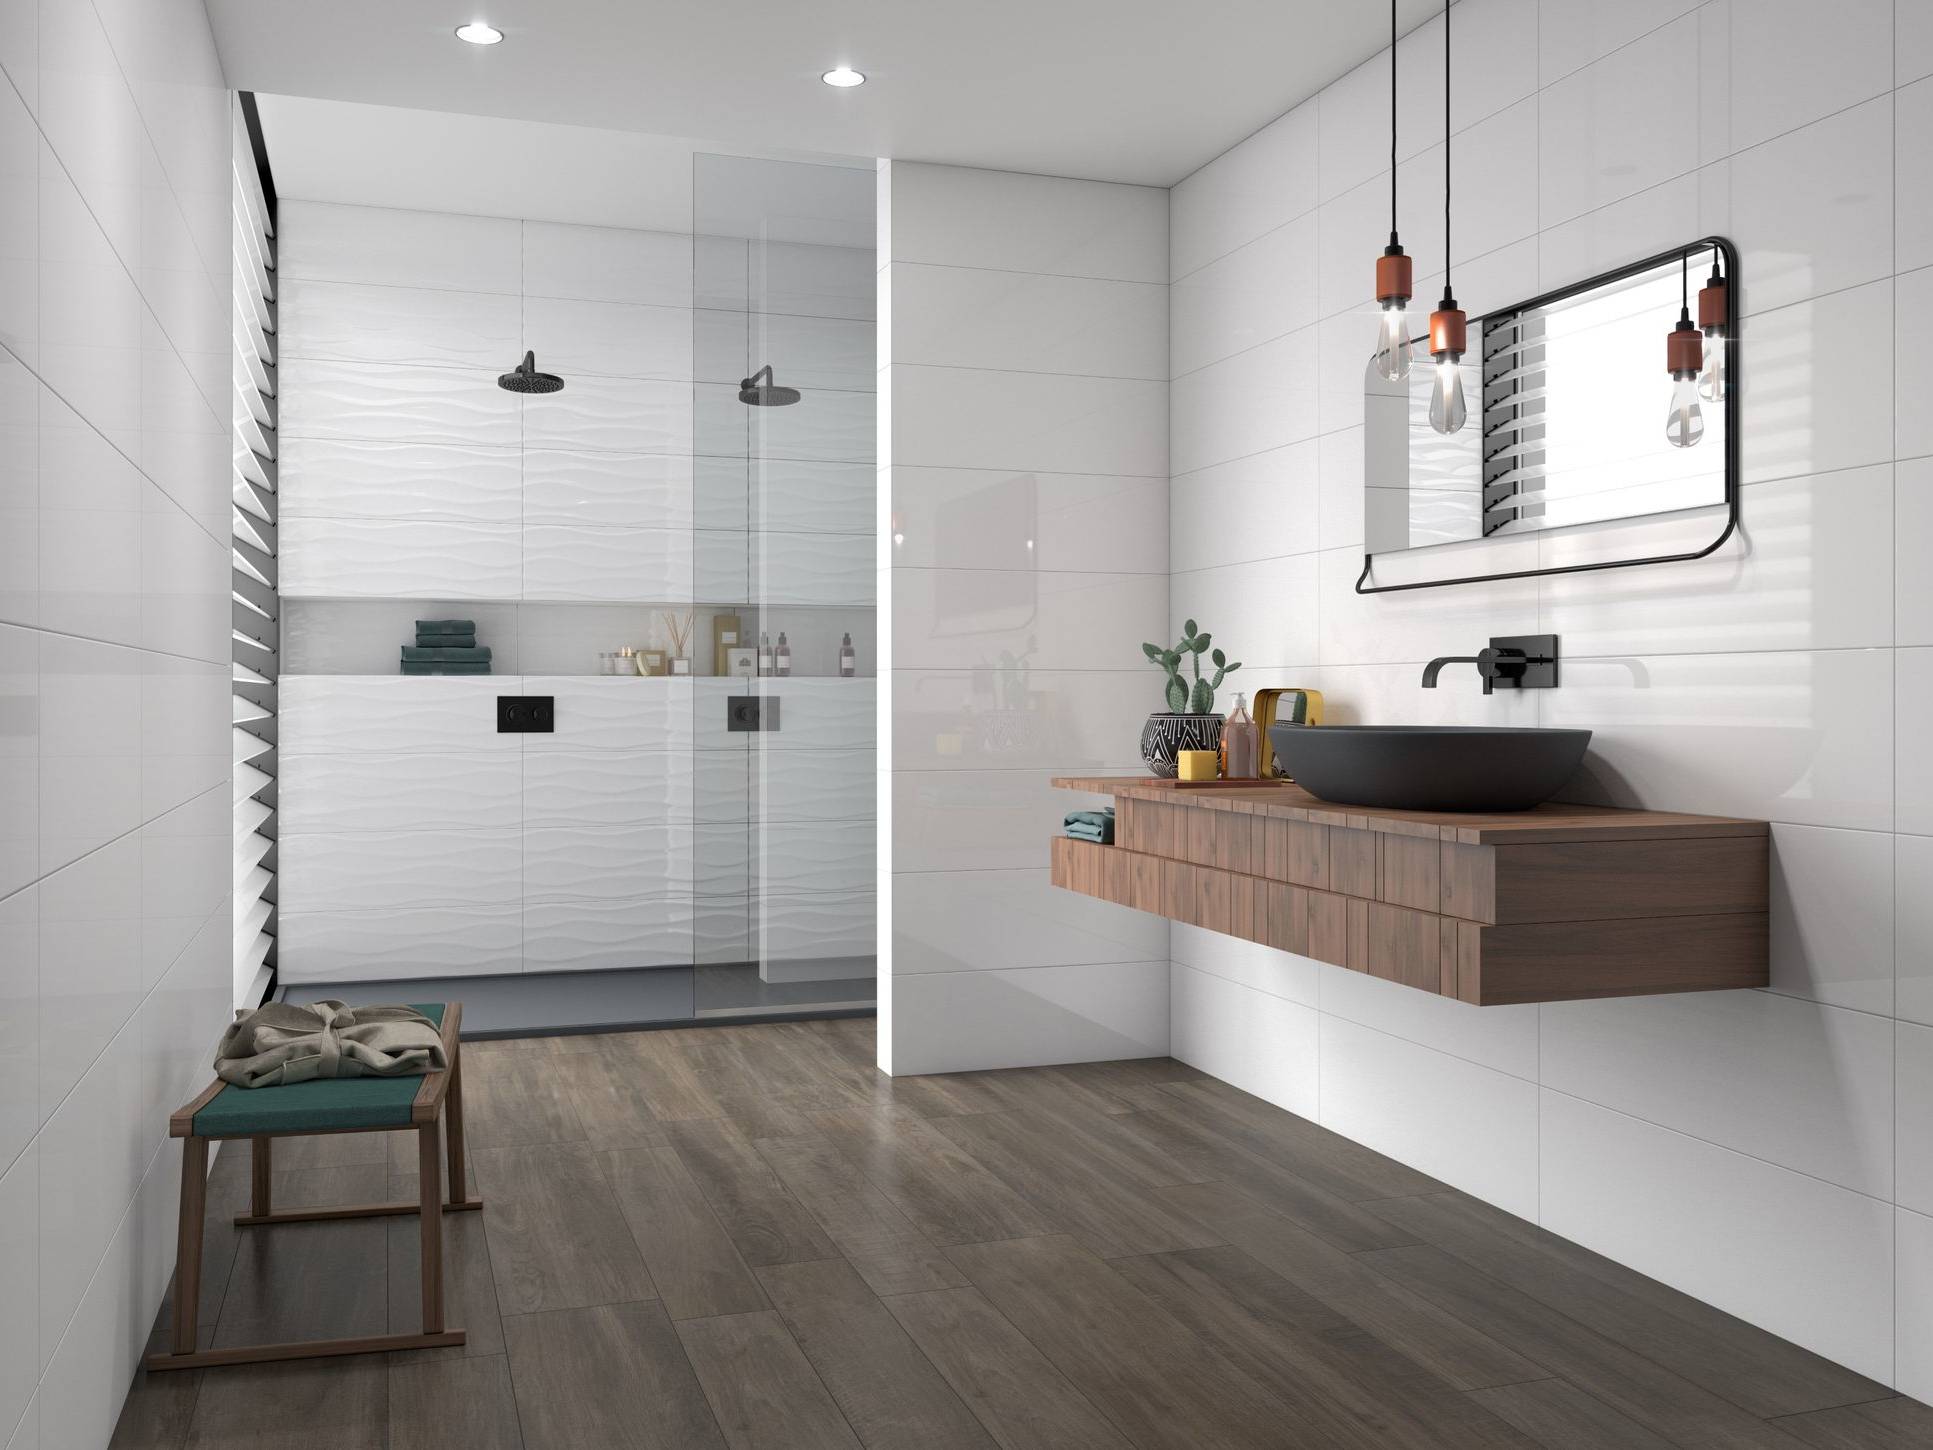 Venezia Blanco Vibe 10x30  and 10x30 | Qualis Ceramica | Luxury Tile and Vinyl at affordable prices